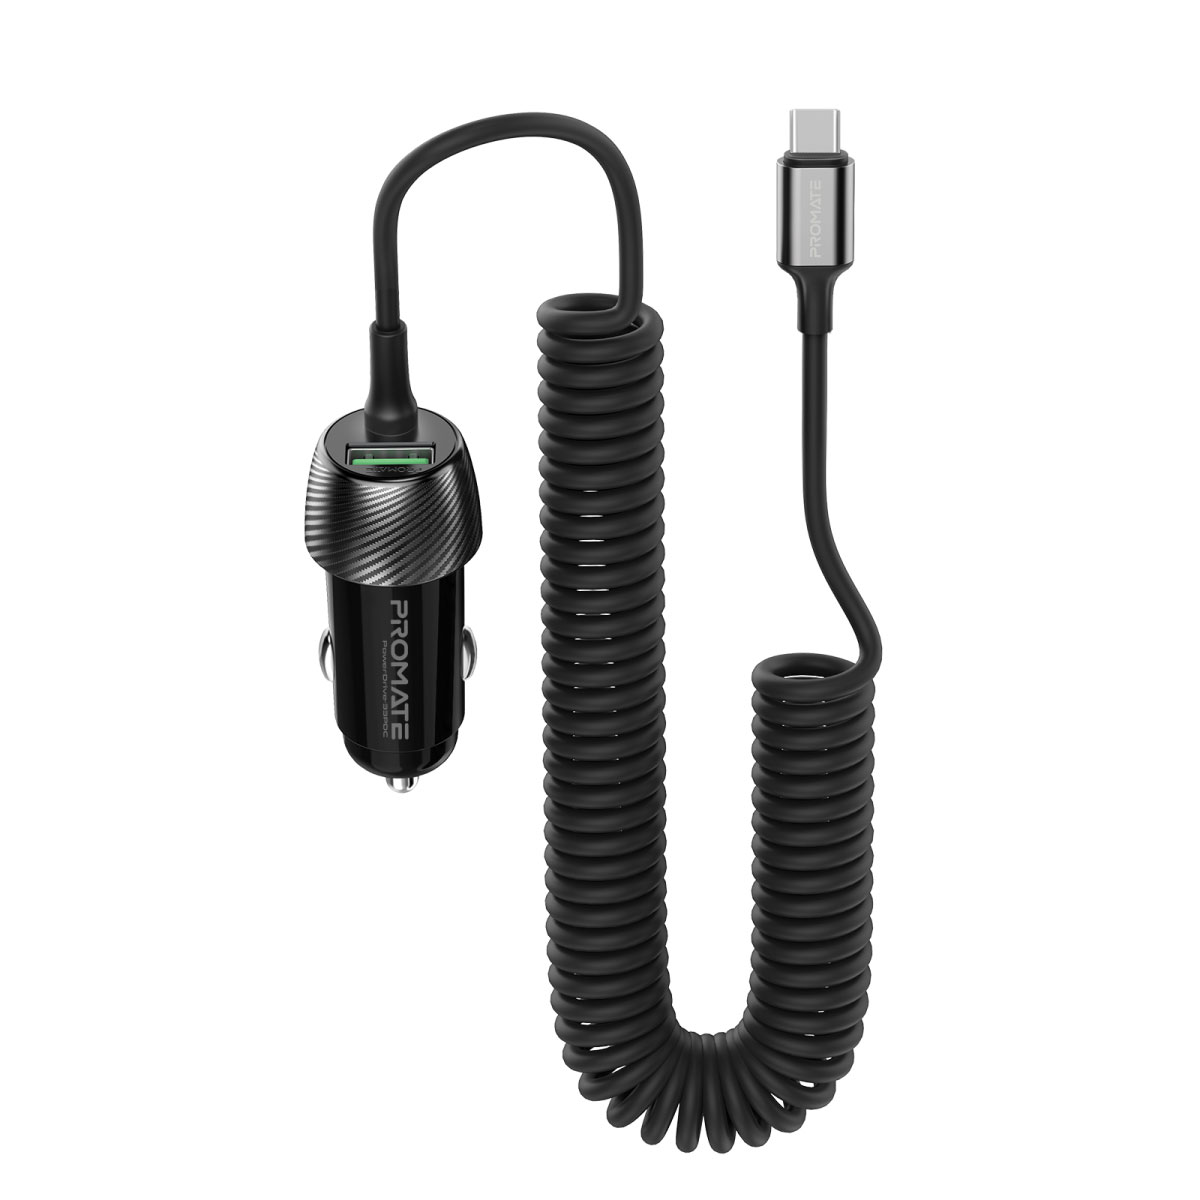 Promate USB-C Car Charger with QC 3.0 Port, 33W USB-C Power Delivery and Coiled Cable, PowerDrive-33PDC